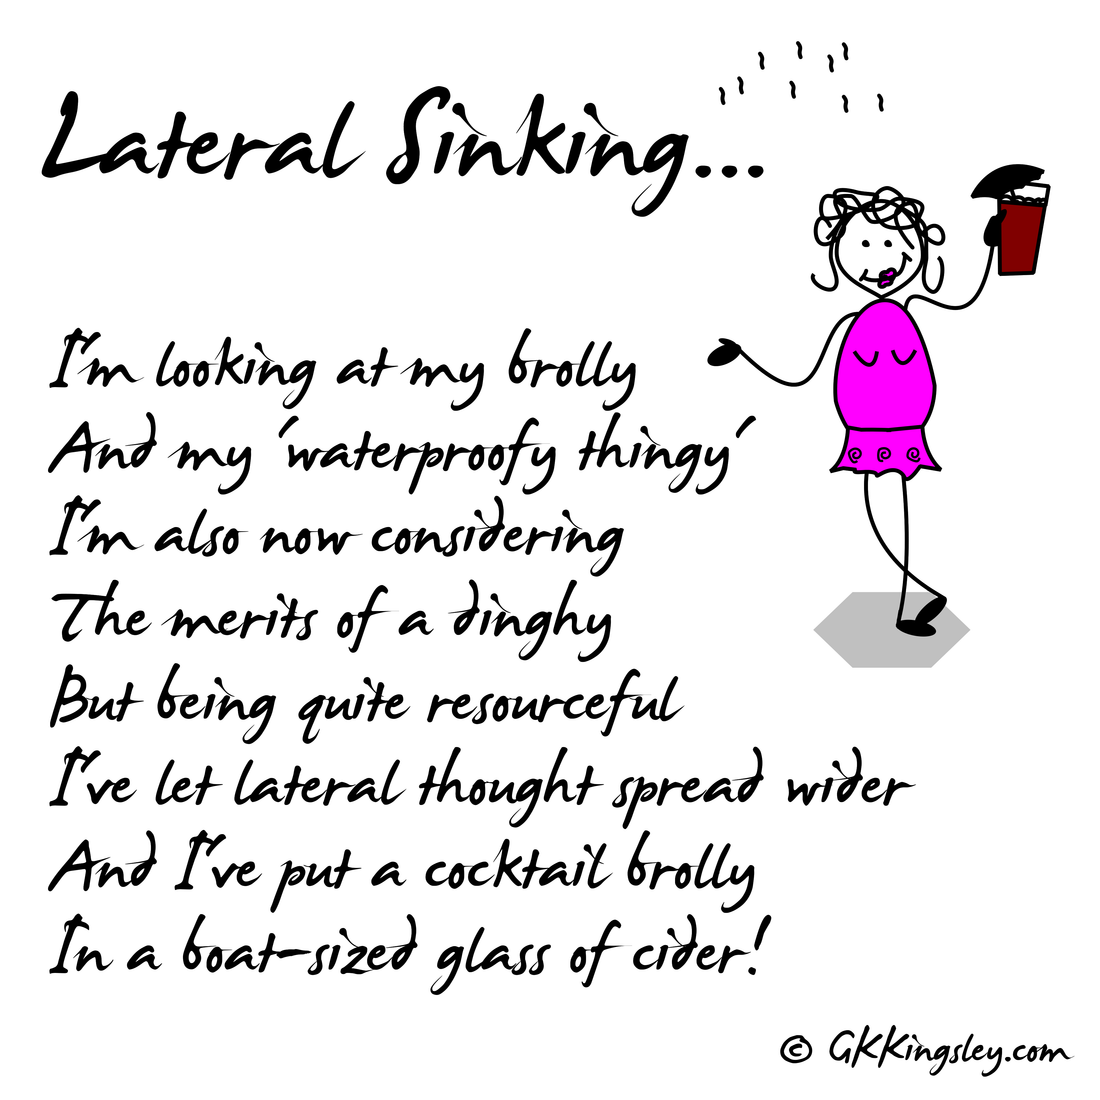 Lateral sinking... 🌧☔️🤦‍♀️😘 - Poem by GK Kingsley